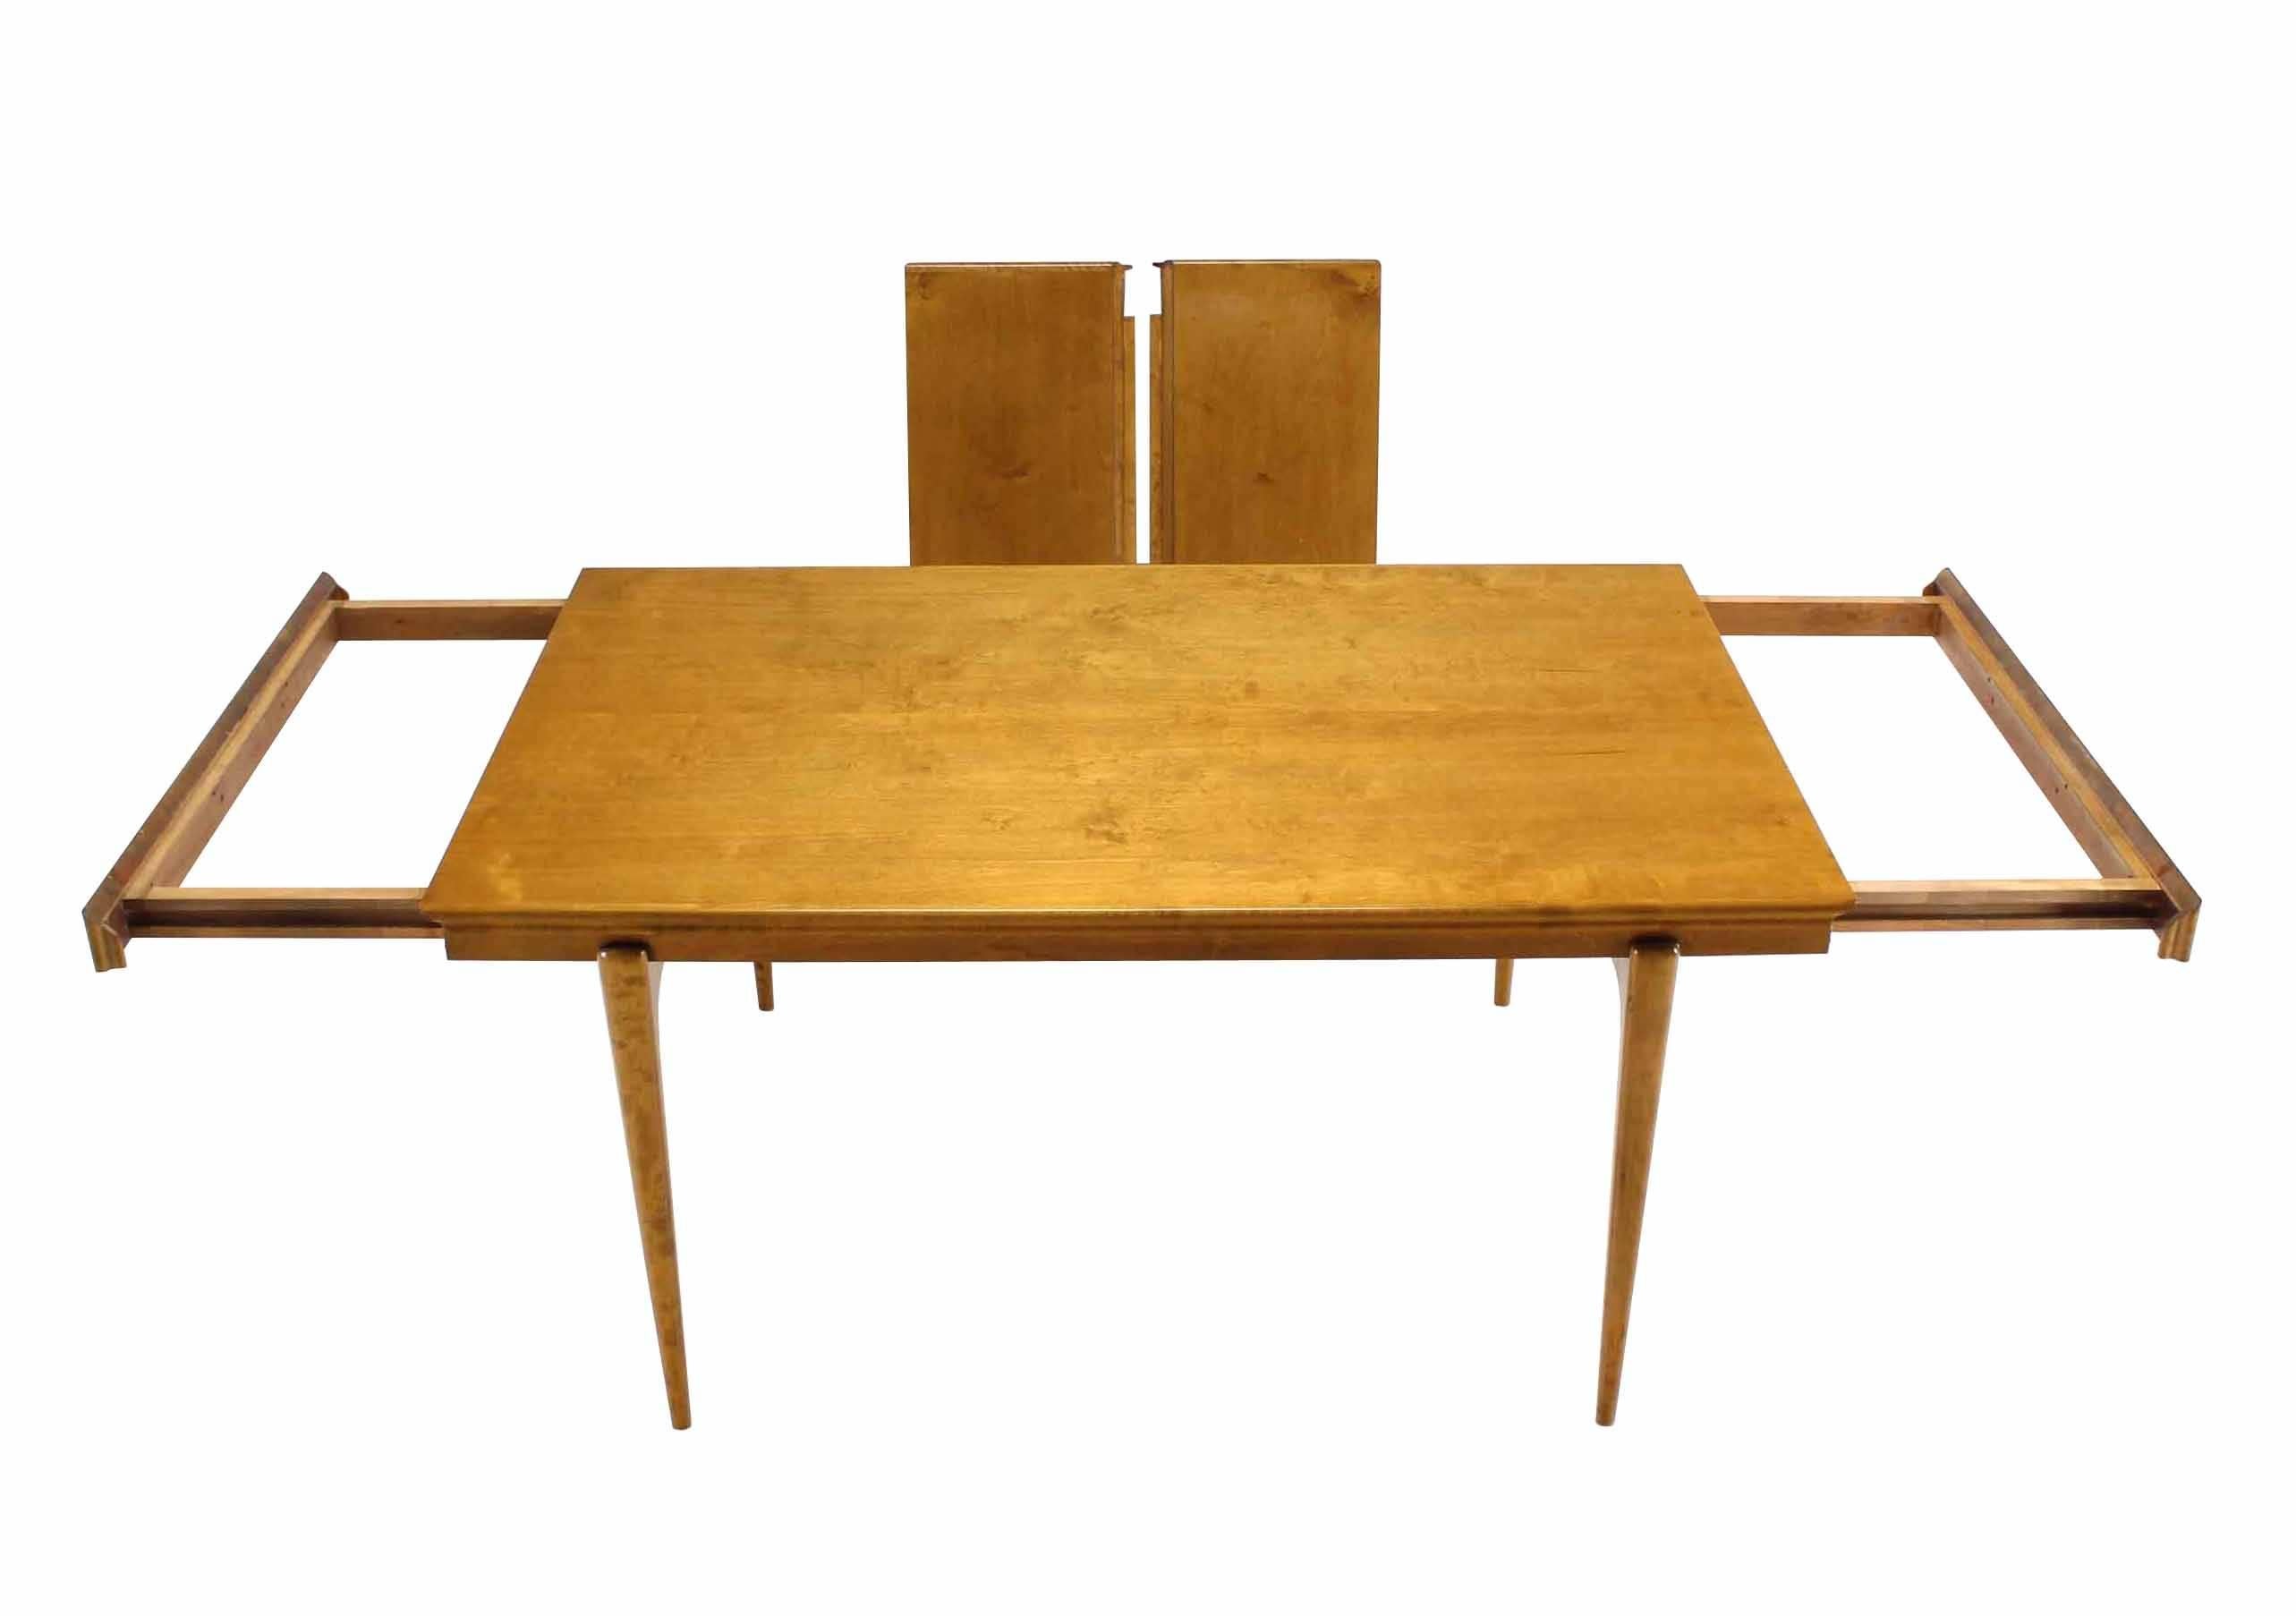 Very nice blond birch dining table by Edmond Spence in excellent original condition with 2 x 14